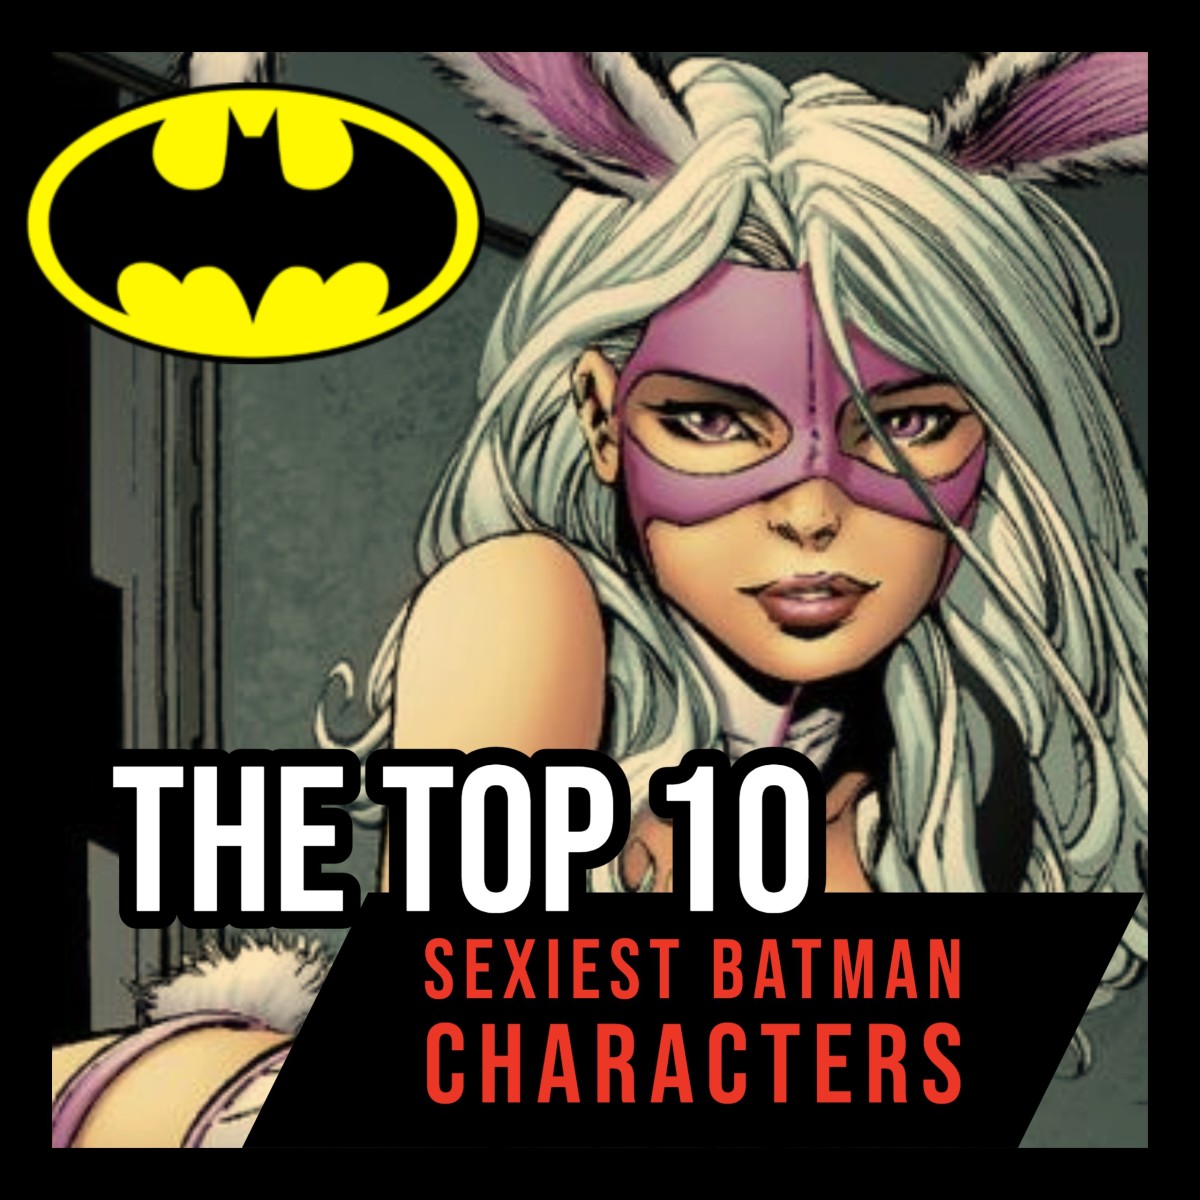 From Batgirl to the White Rabbit, this article examines and ranks the 10 sexiest Batman characters.